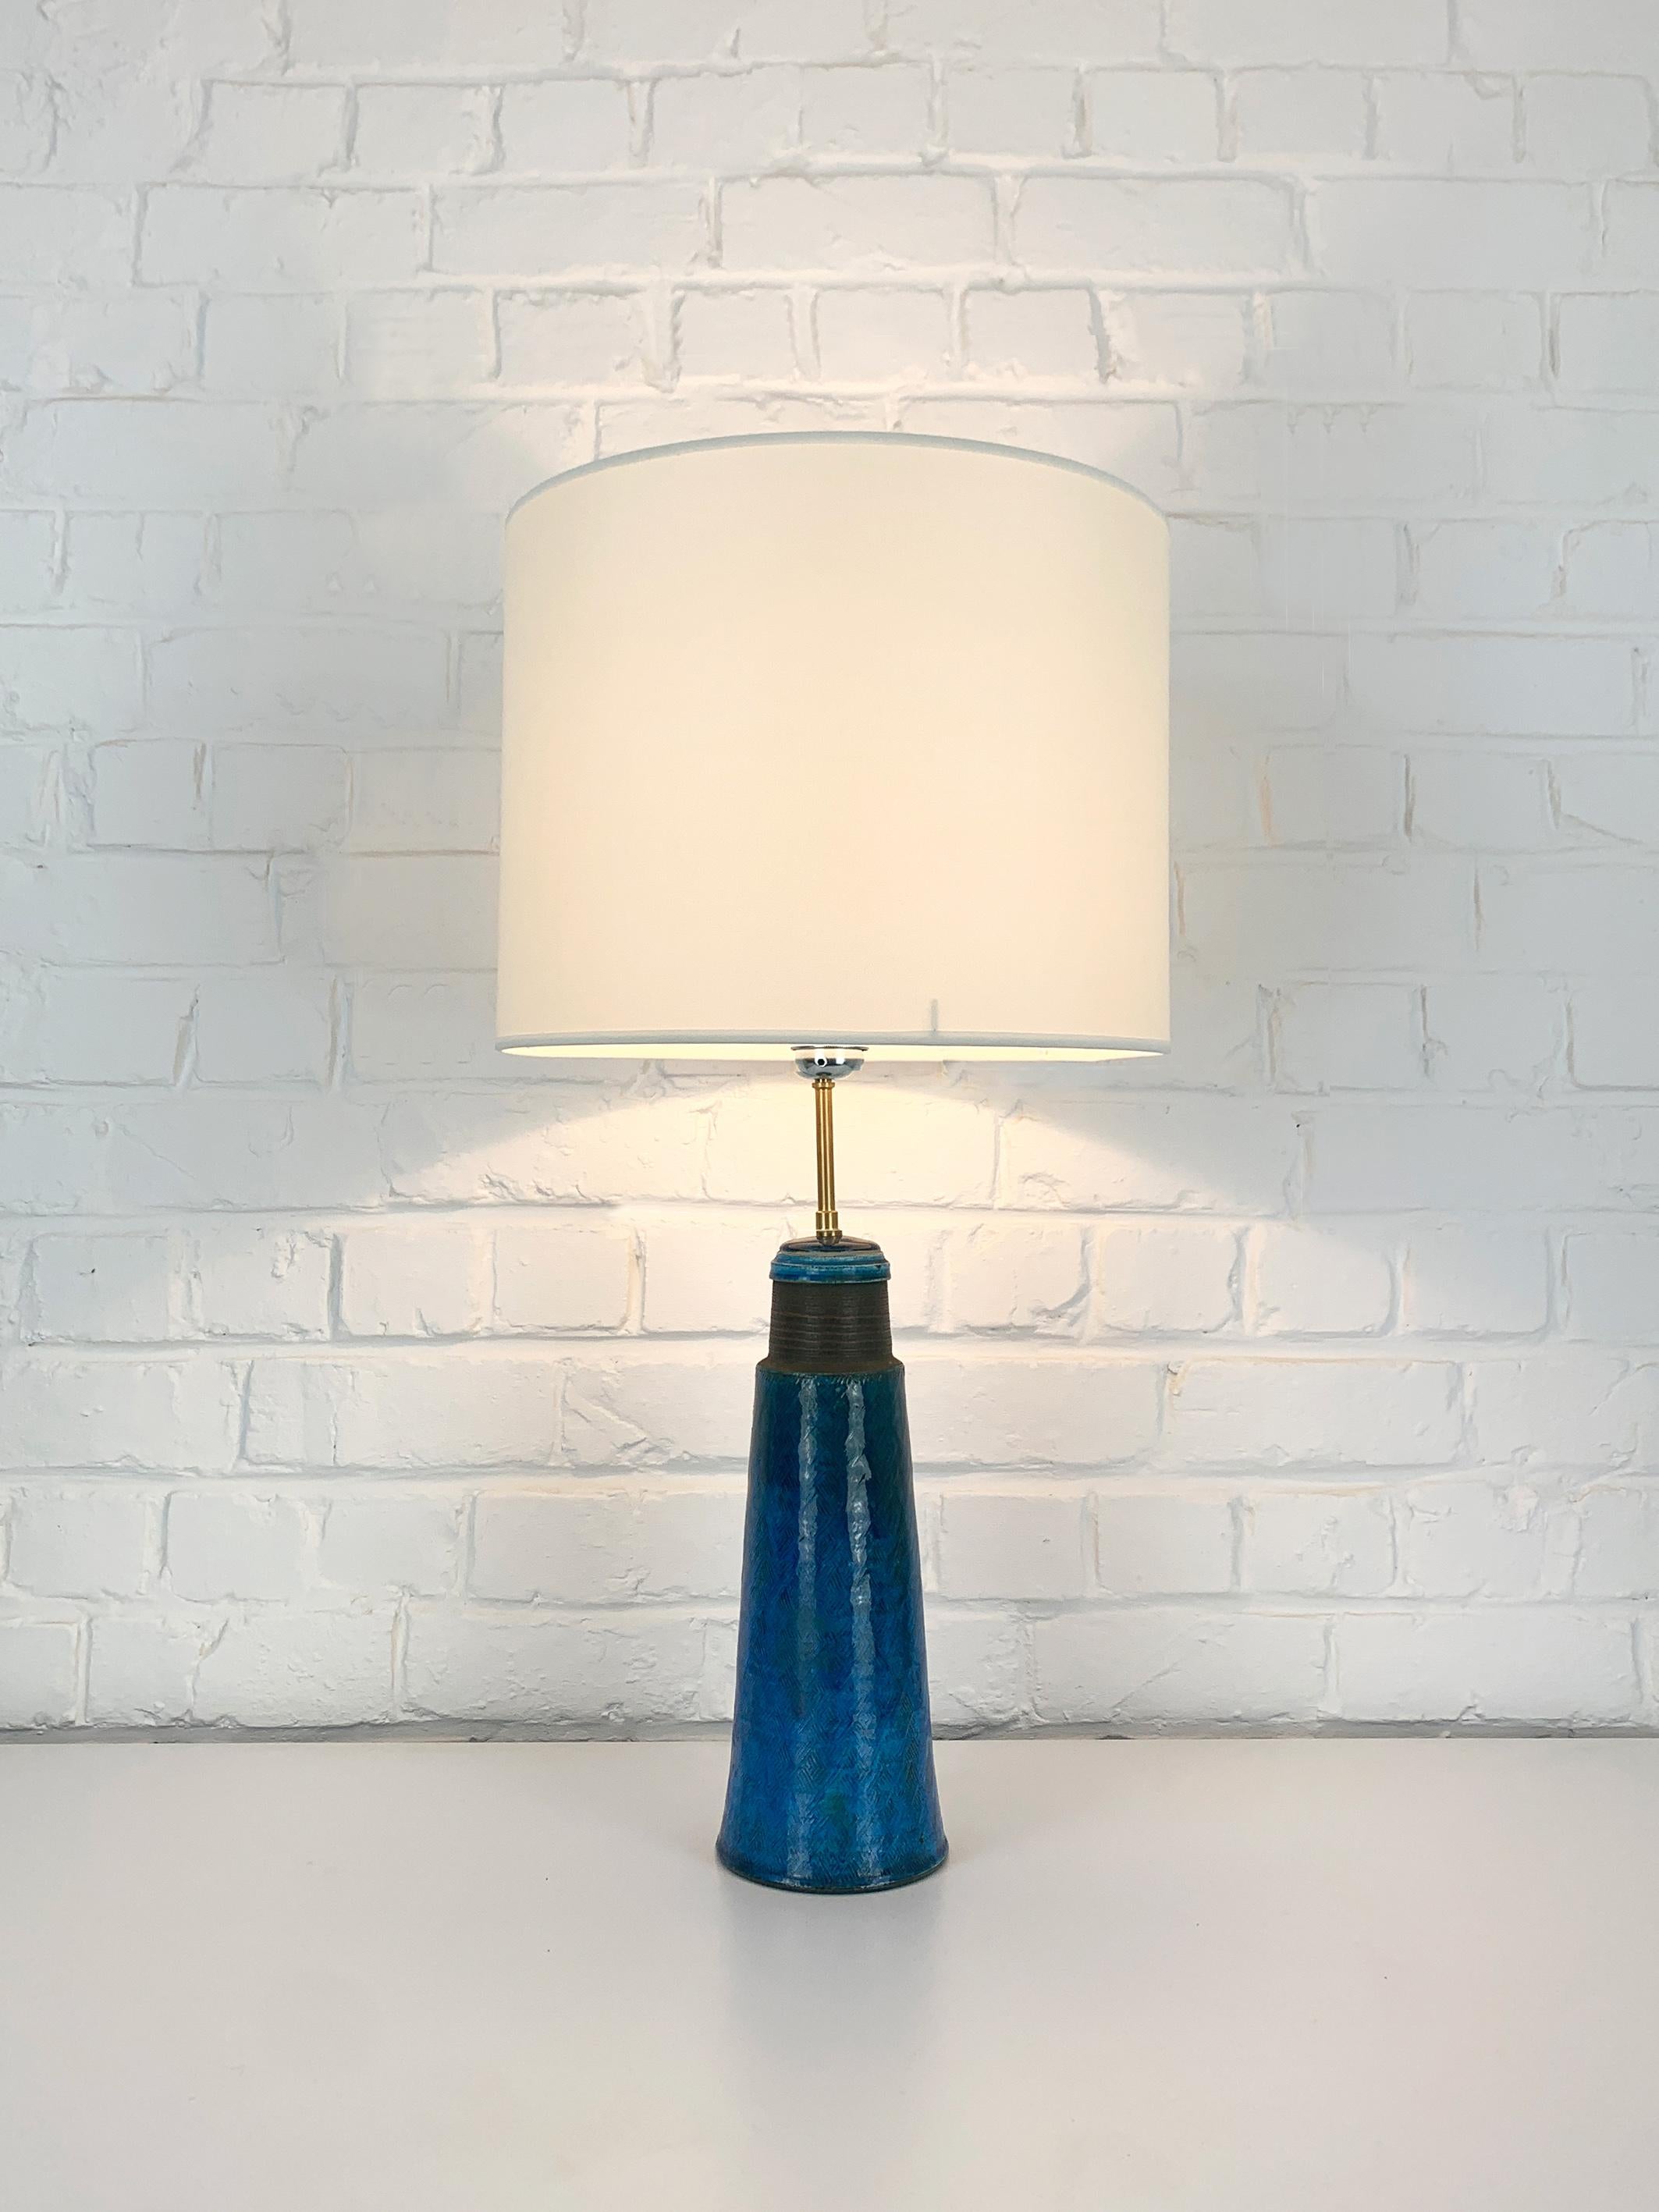 Blue glazed stoneware table lamp designed by Nils Kähler in the 1960s. Manufactured by the workshop of Herman A. Kähler Ceramic (HAK) in the town of Naestved in southern Denmark.
Nils Kähler was the fourth generation of the Kähler family actif in